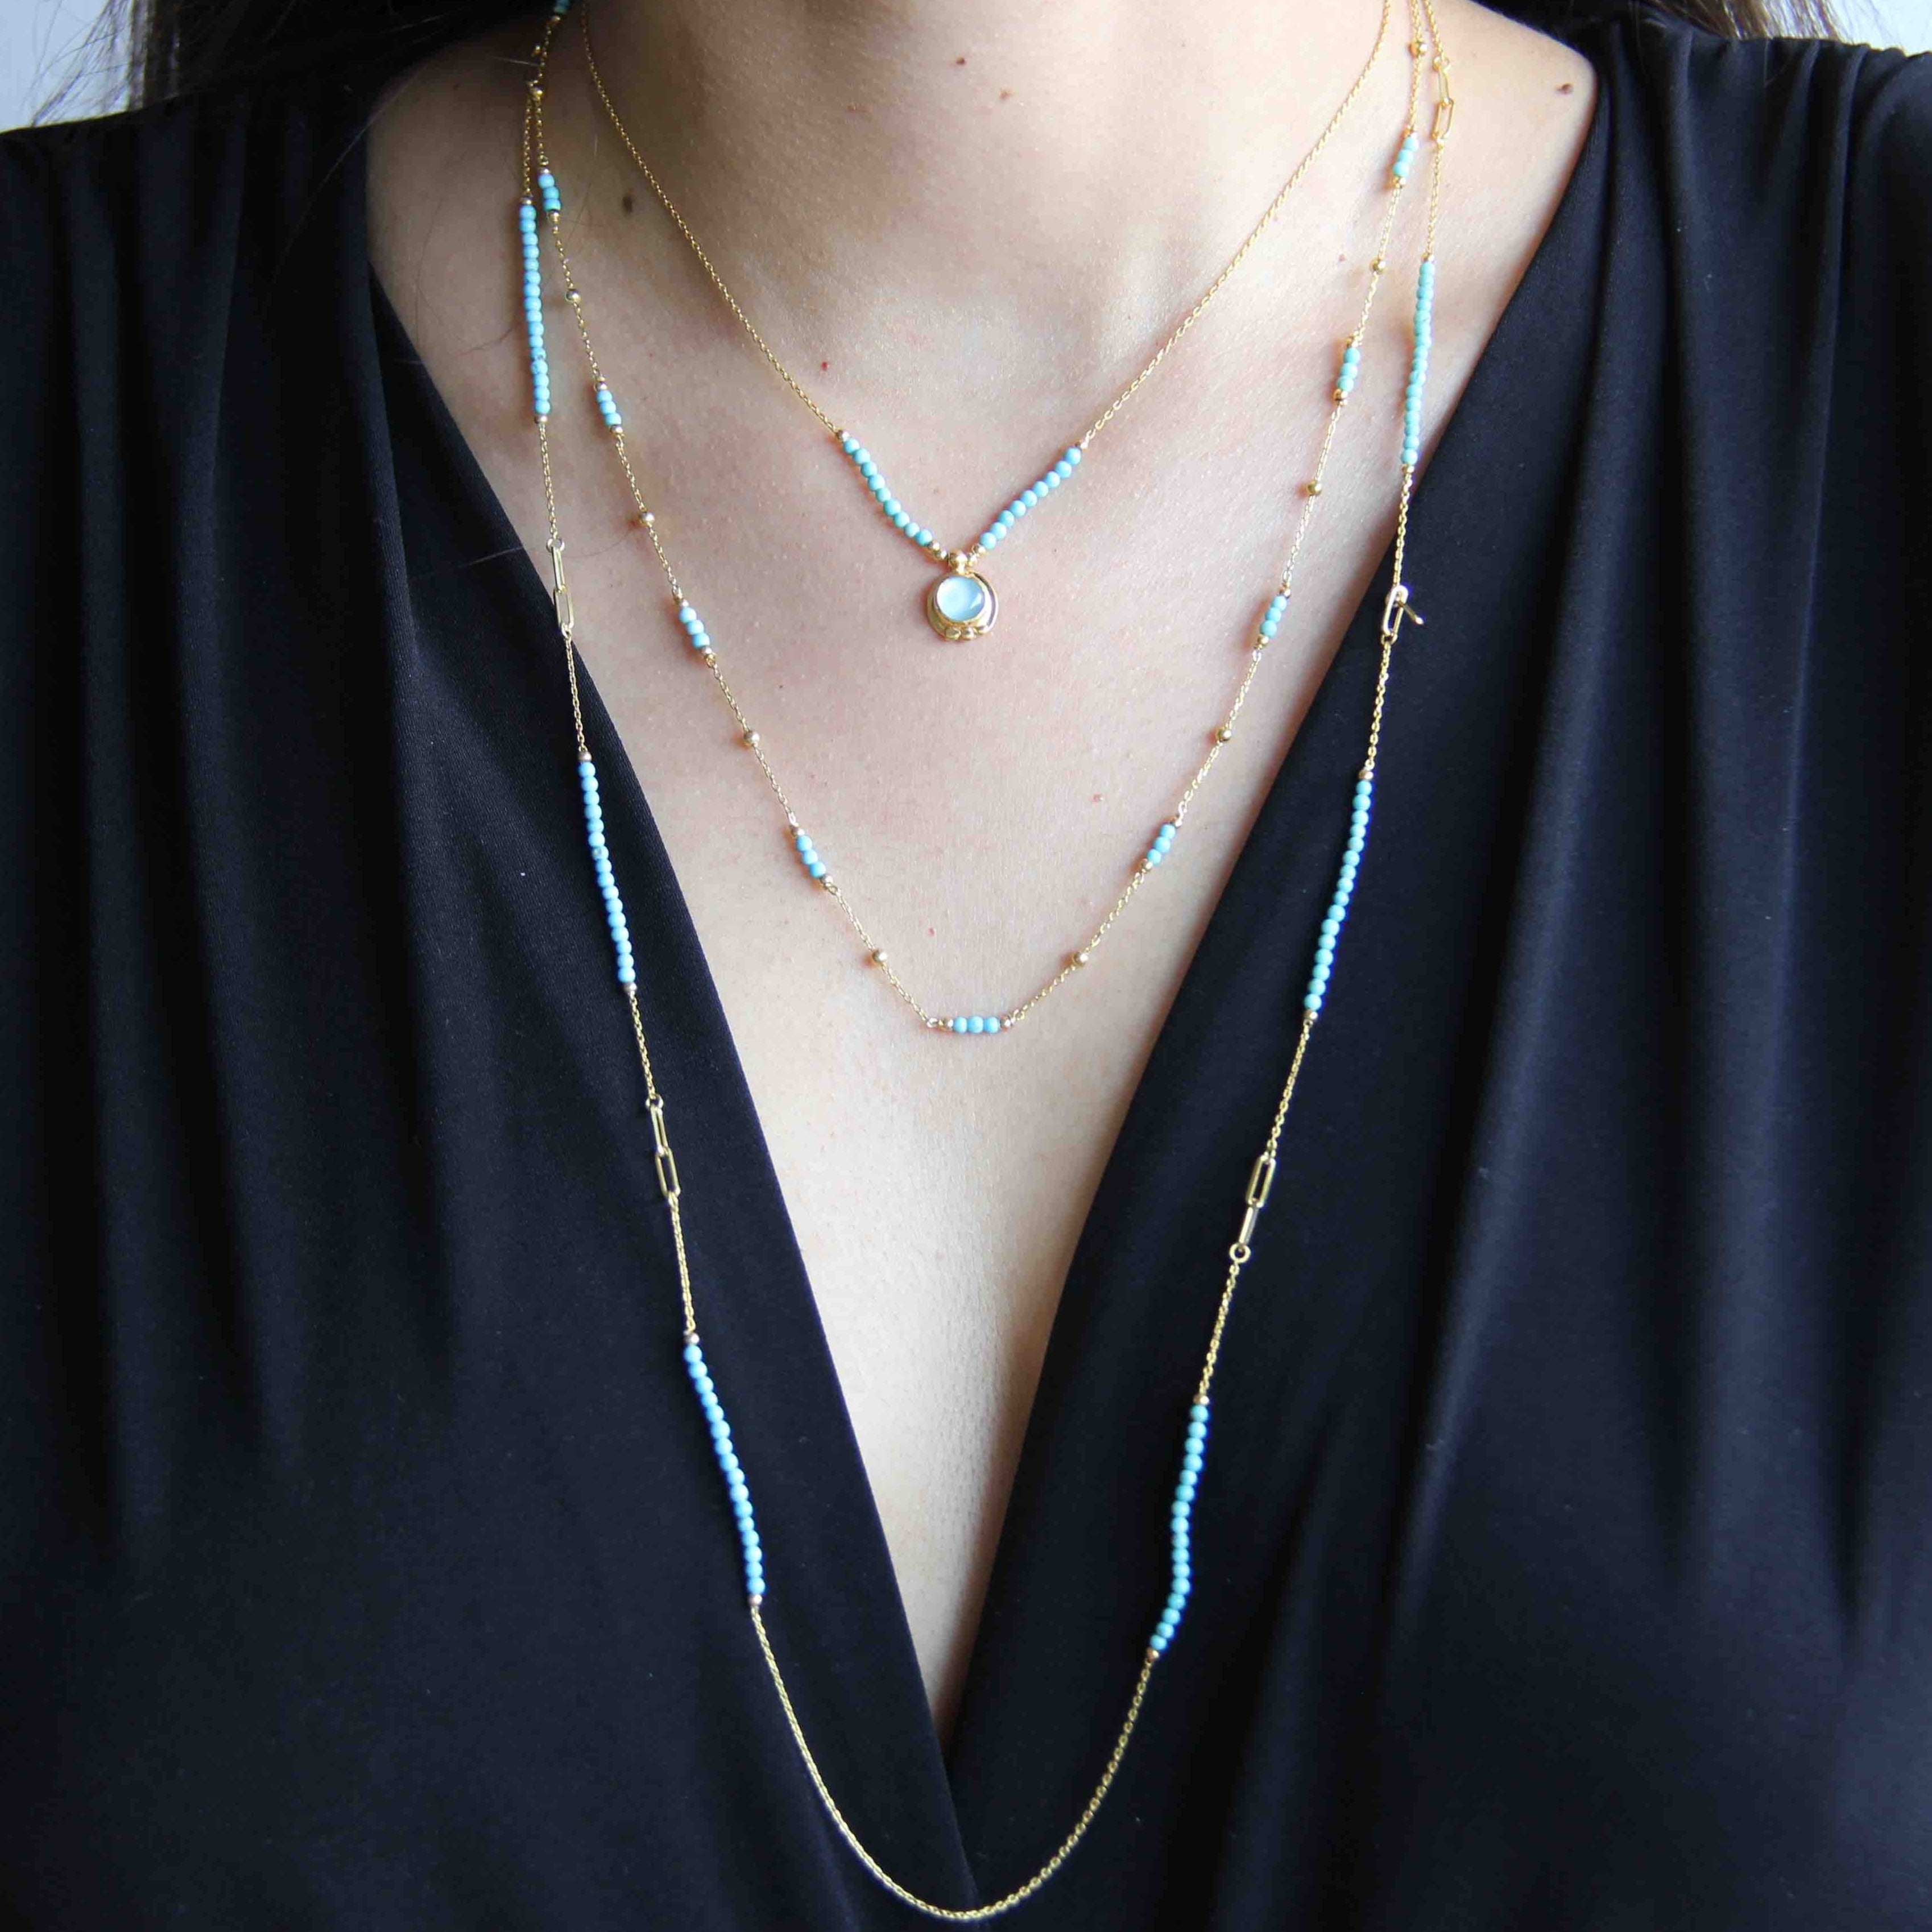 Layered Necklaces - Multi-Strand Designs For A Chic Look - Lovisa